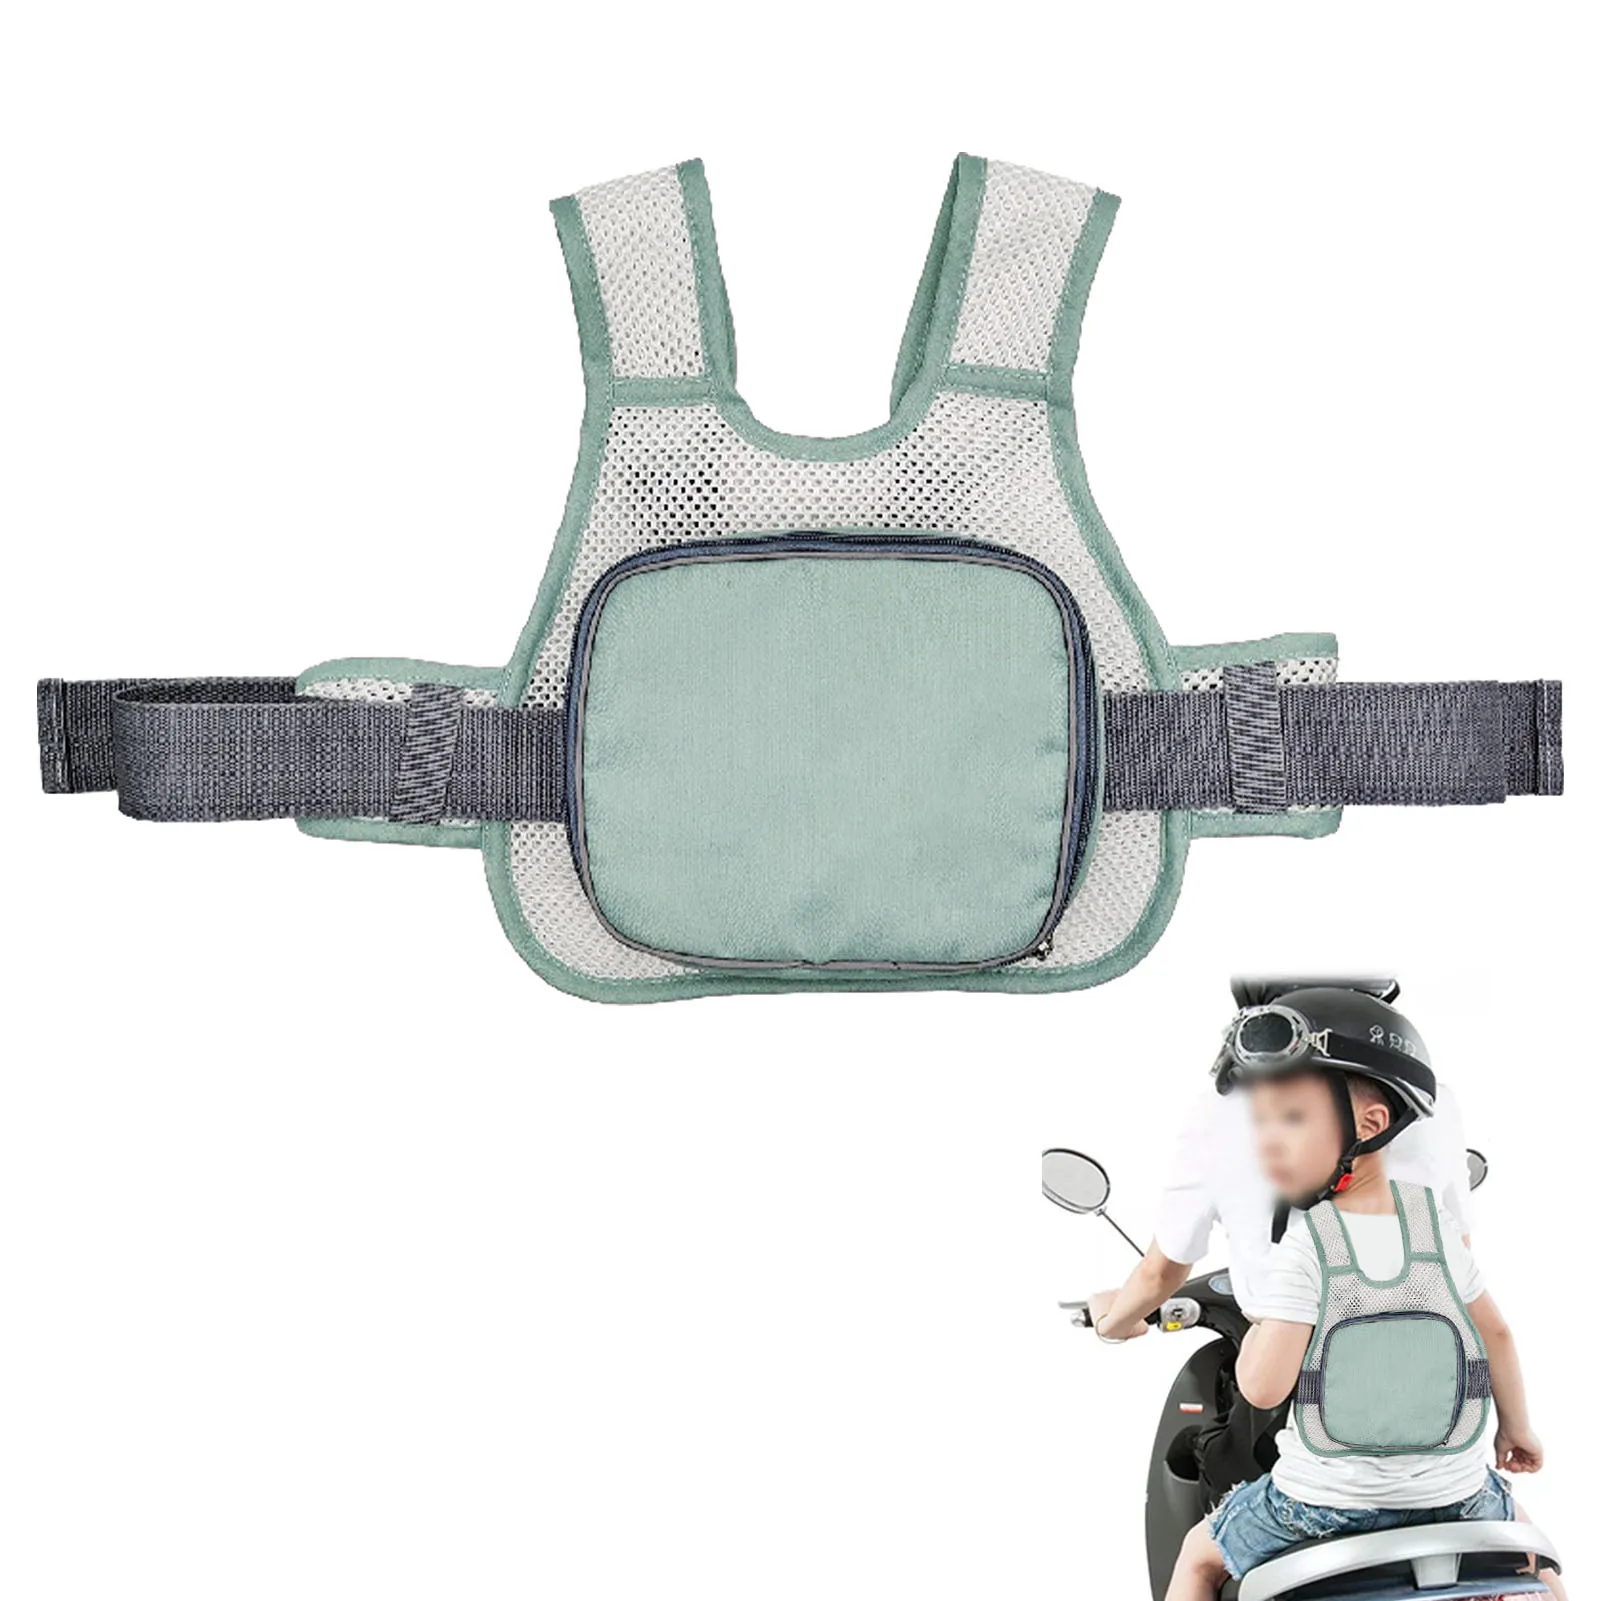 Kids Motorcycle Harness Adjustable Breathable Shoulder Straps Anti-Drowsiness Anti-Drop Child Motorcycle Harness with Reflective Design,Dark Blue 